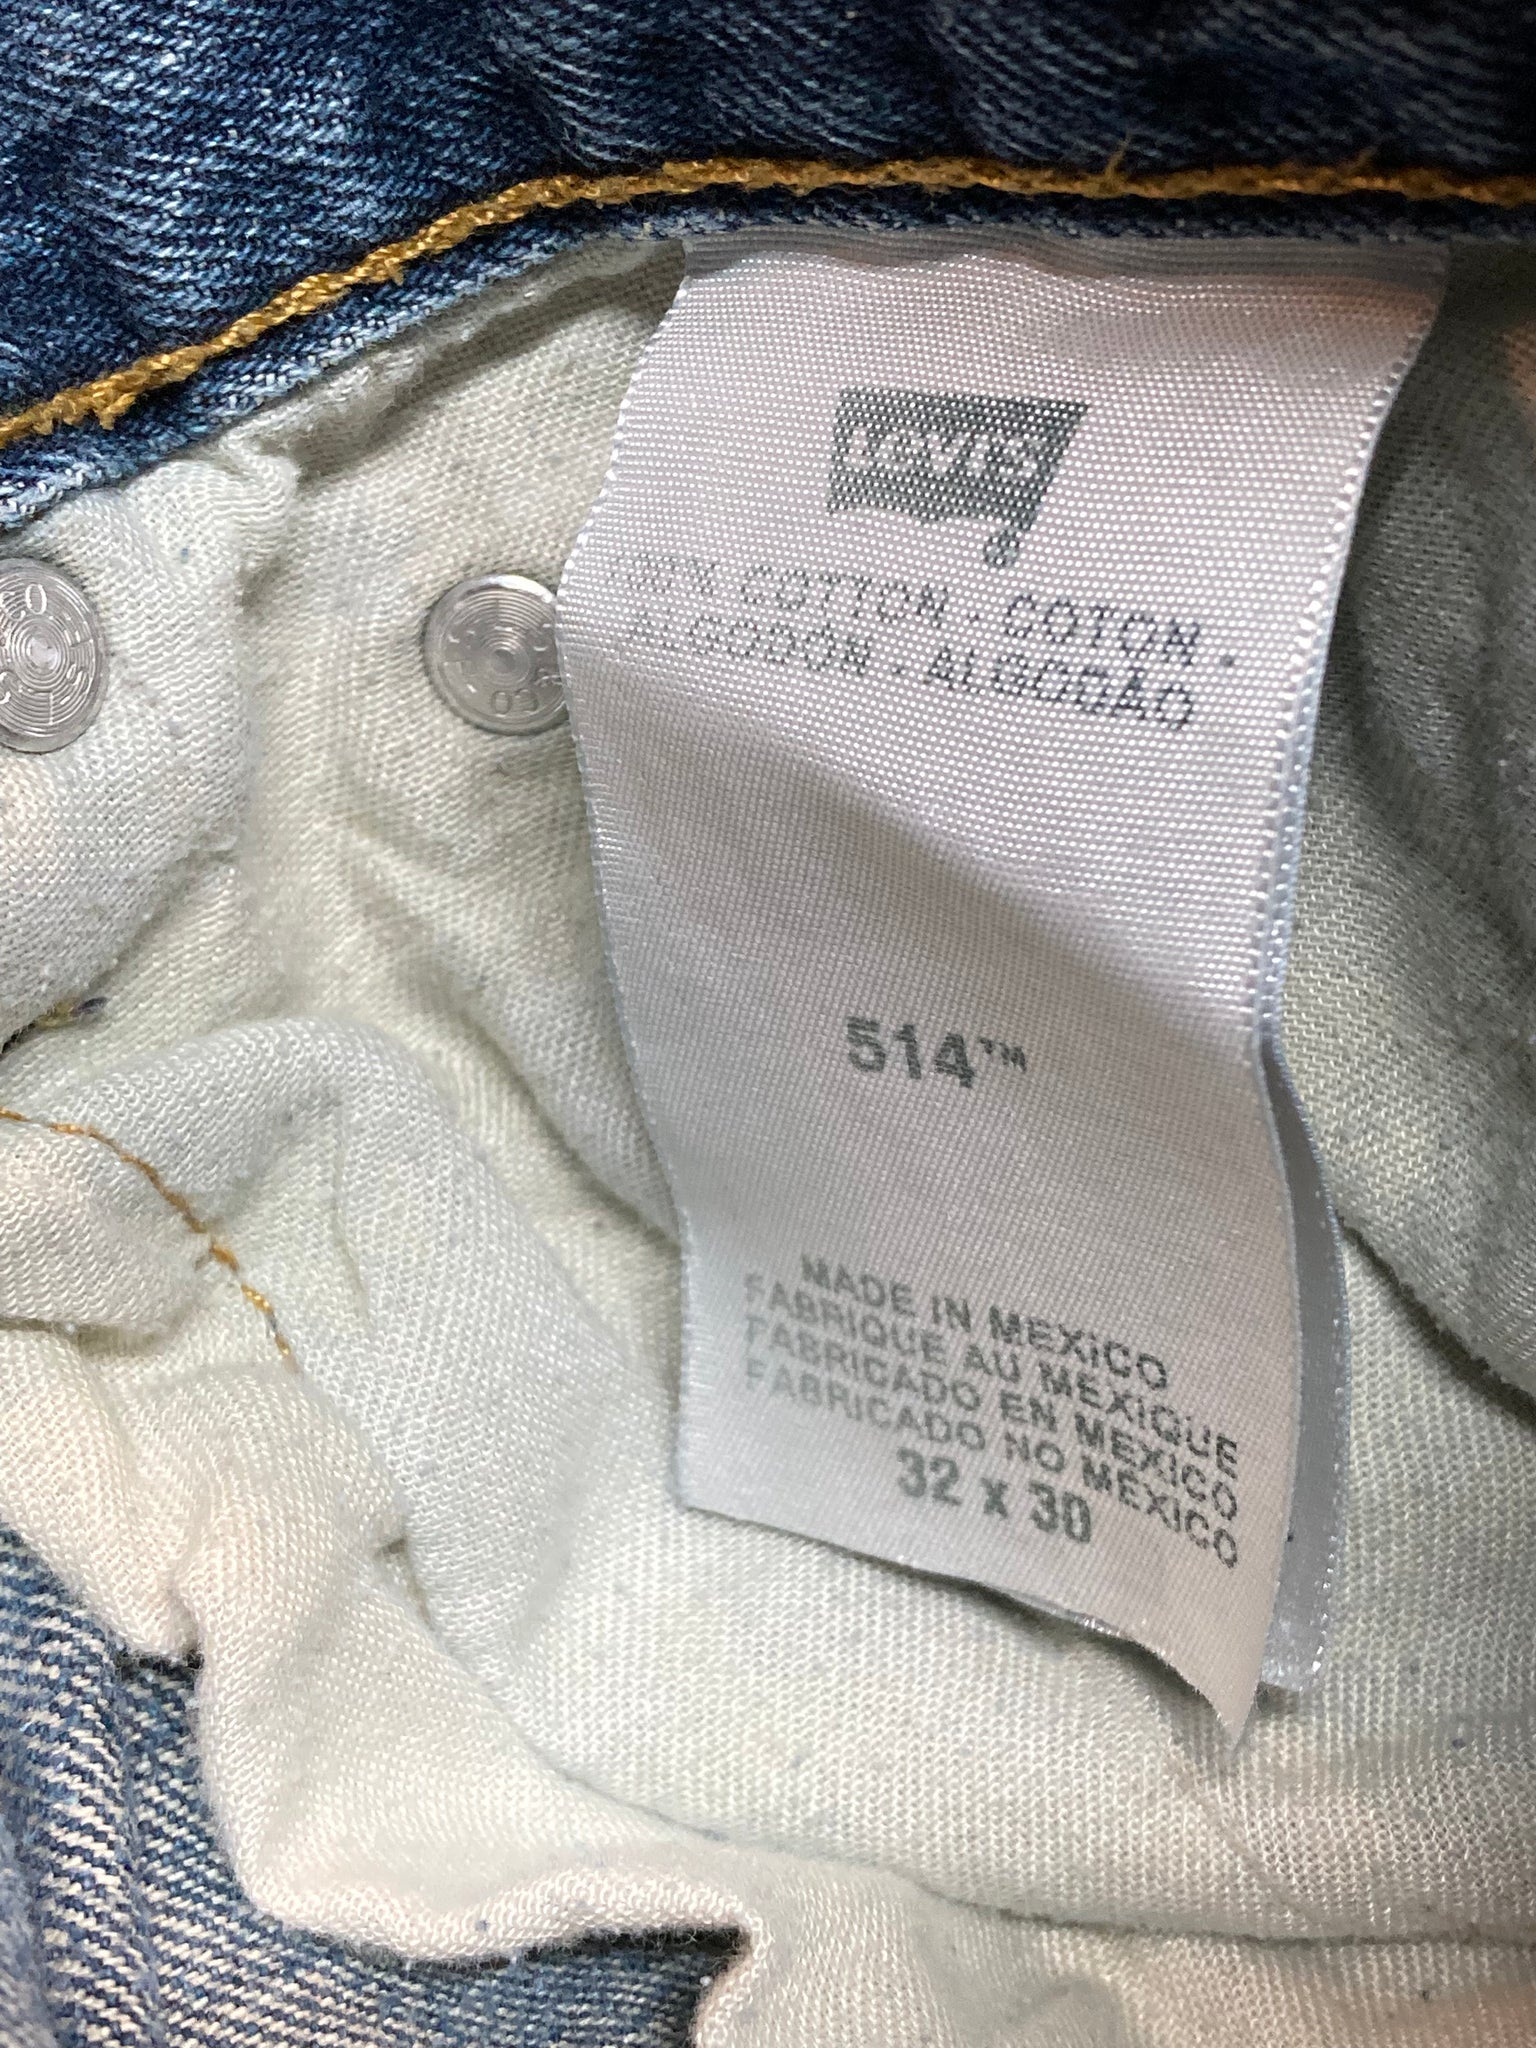 Levi's 514 - 32”x31 Vintage Red Tab Denim Jeans, Made in Mexico